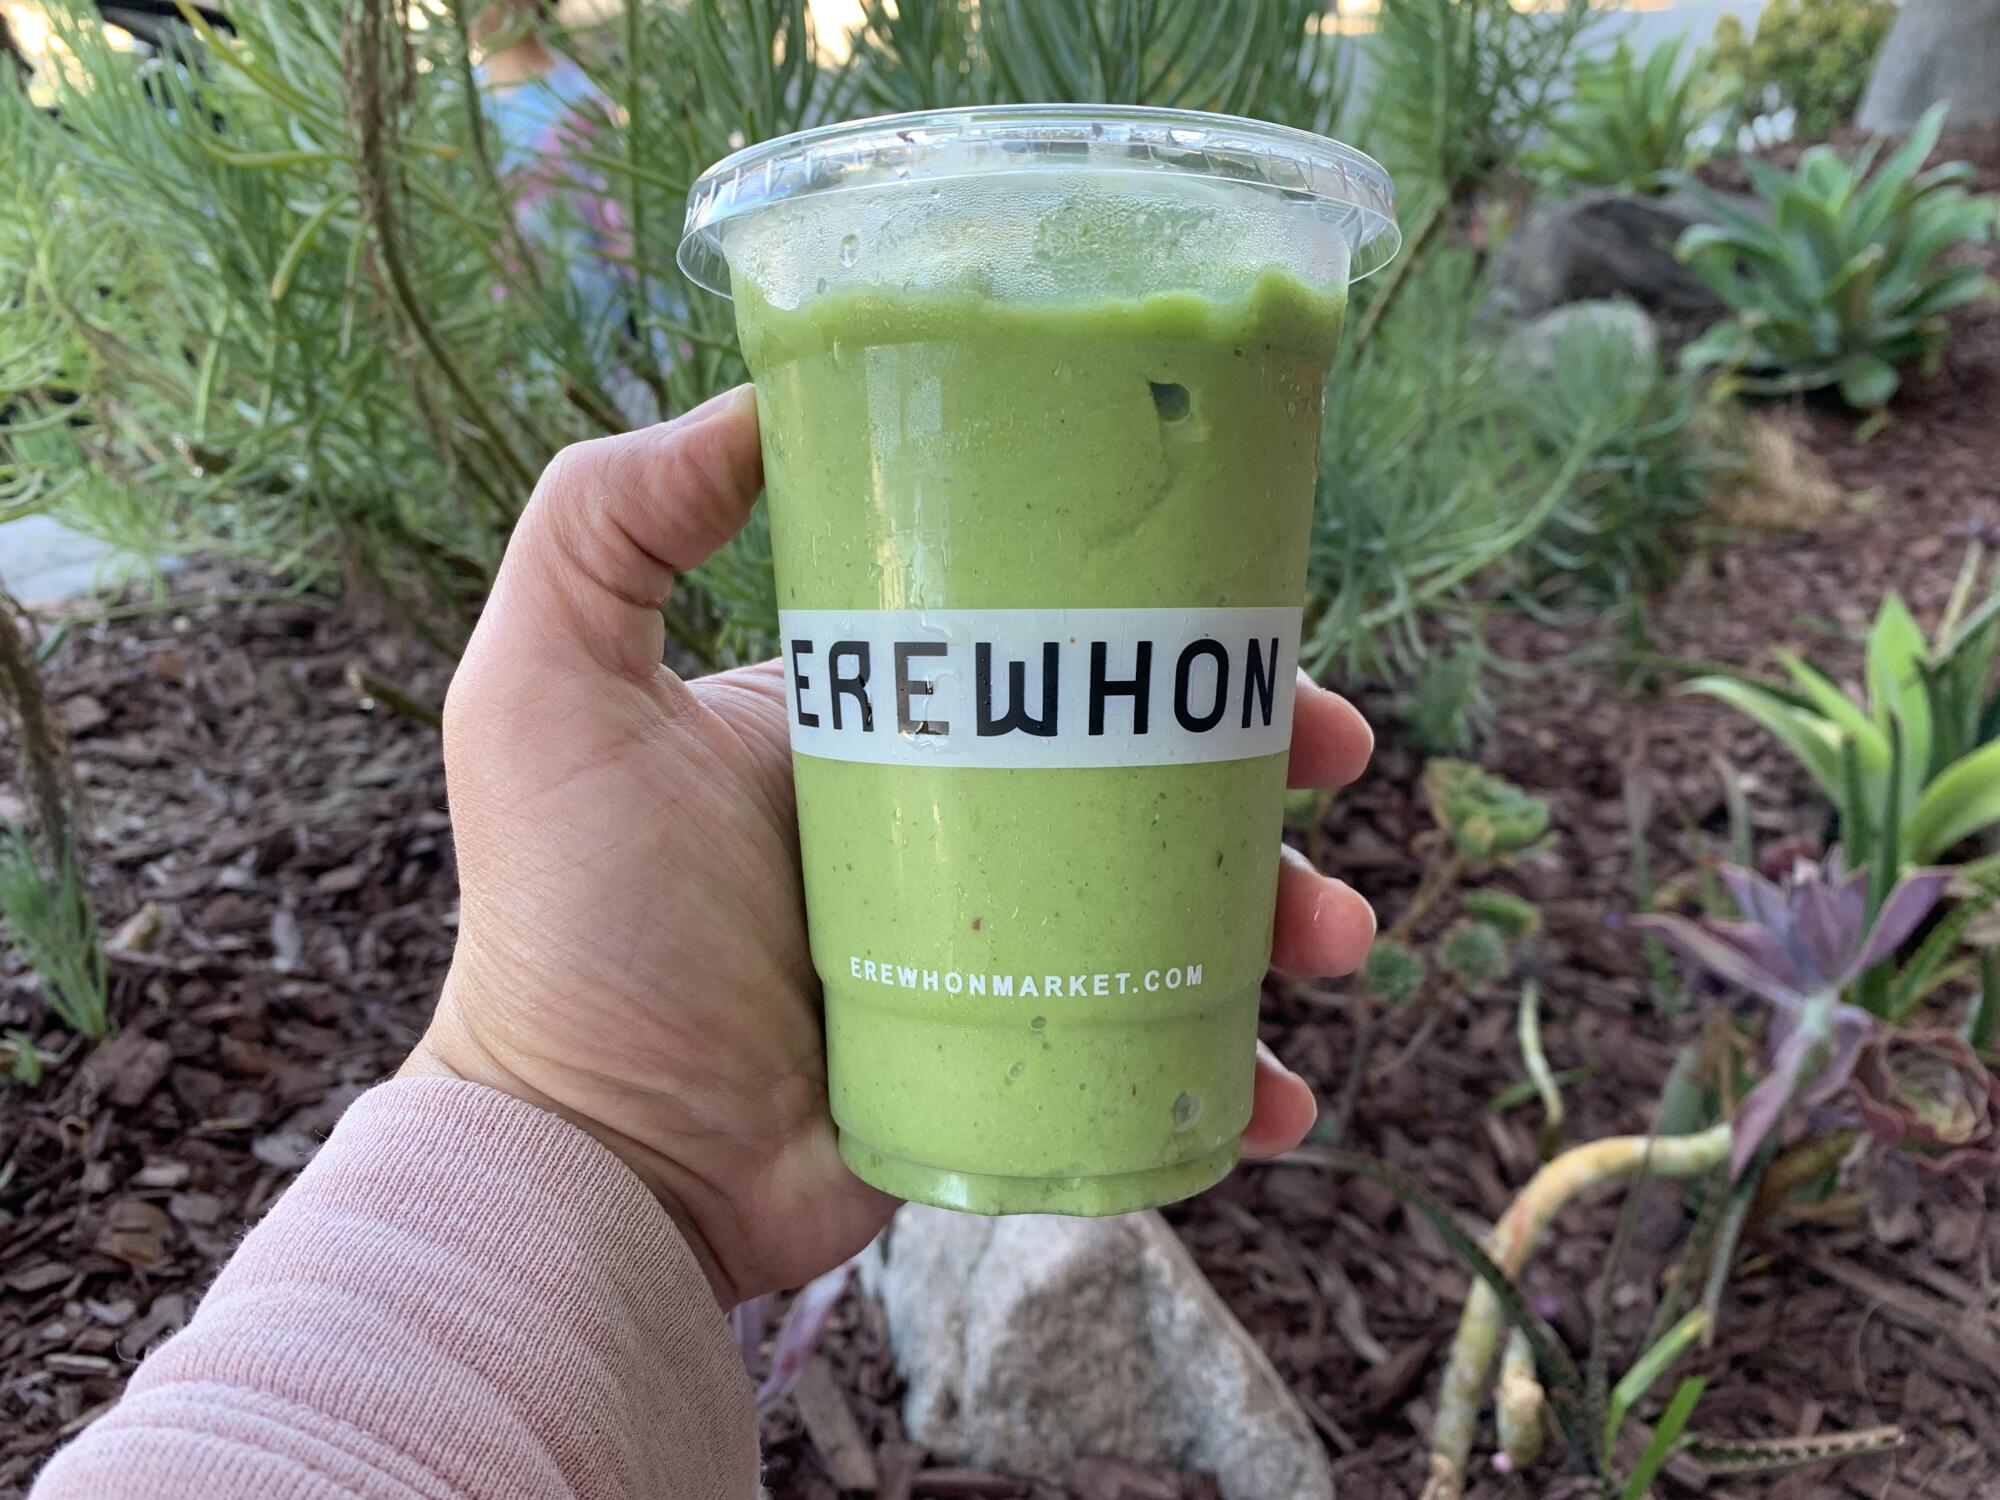 A hand holds a plastic cup containing a green smoothie.